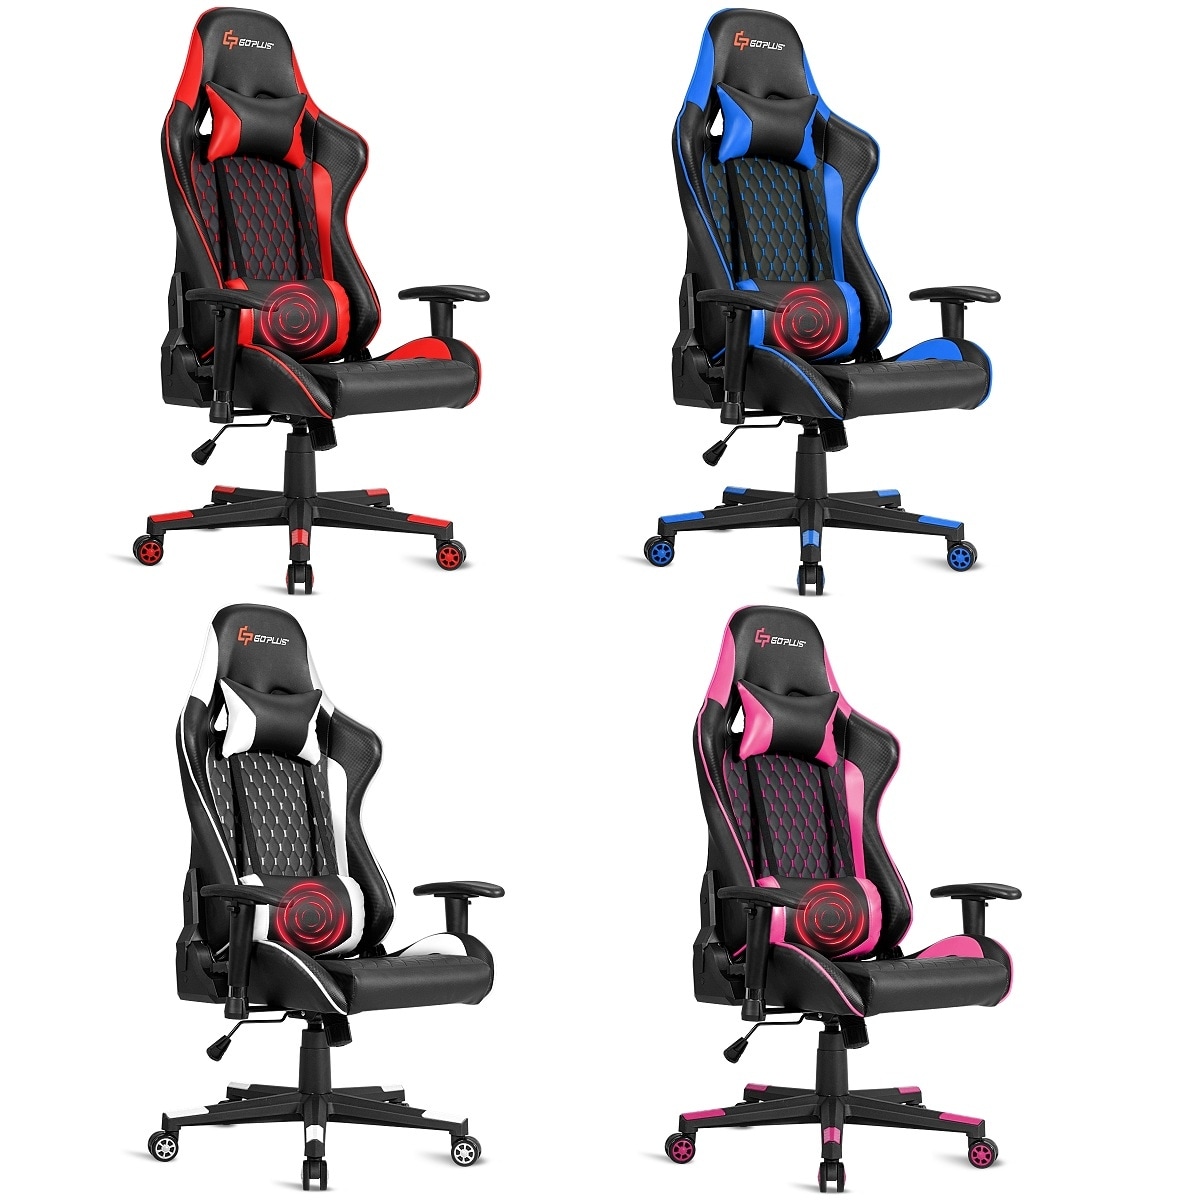 https://ak1.ostkcdn.com/images/products/is/images/direct/048287f689a3cadb3b31f8844154227e0aa71686/Massage-Gaming-Chair-Reclining-Racing-Chair-w-Lumbar-Support-and-Headrest.jpg